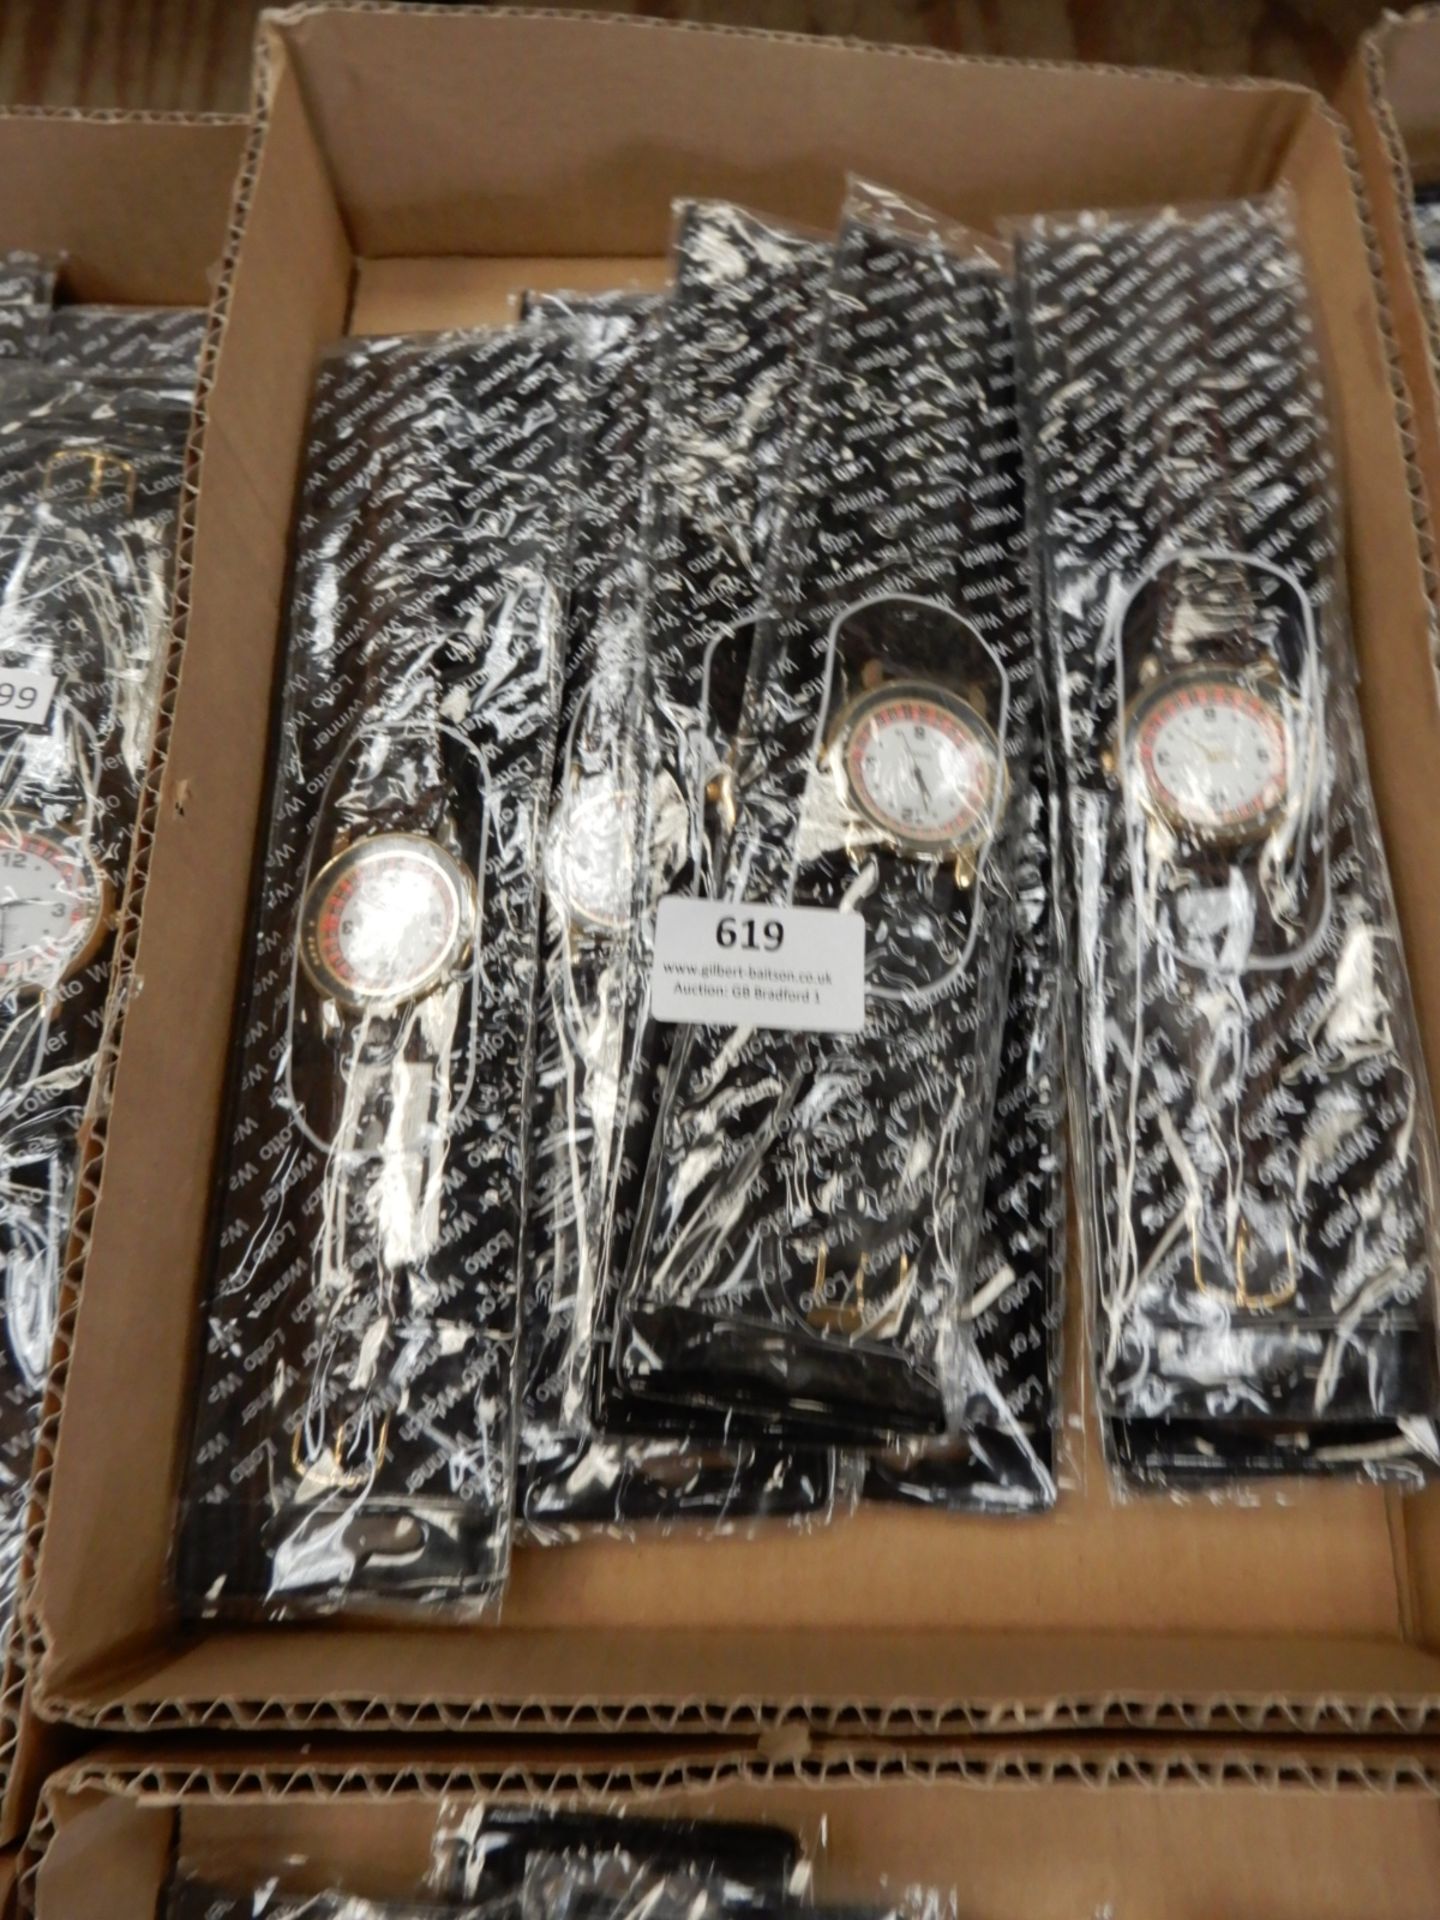 Box Containing 10 Wristwatches with Roulette Wheel